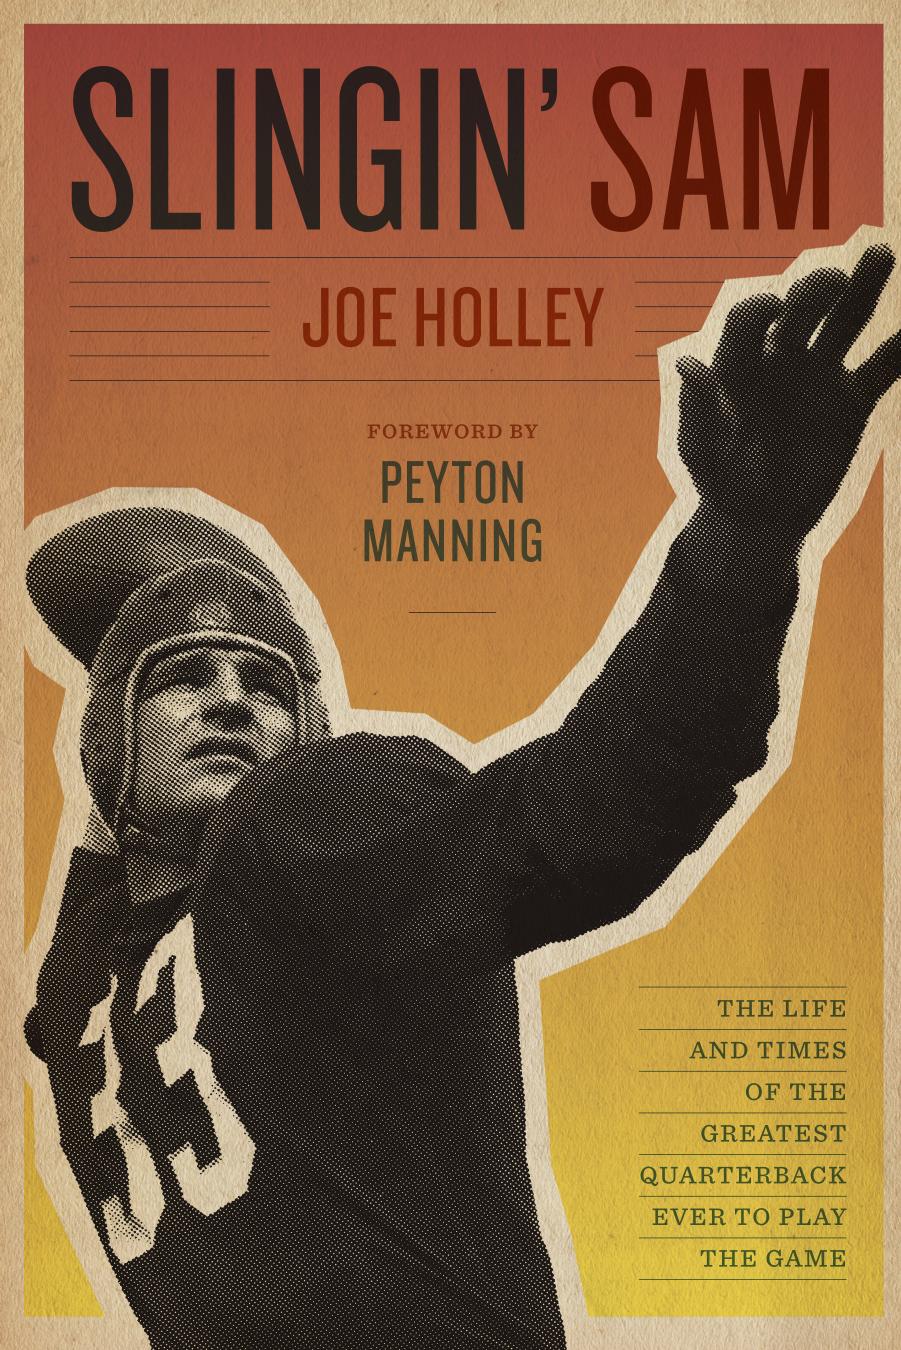 Slingin' Sam: The Life and Times of the Greatest Quarterback Ever to Play the Game by Joe Holley; Peyton Manning